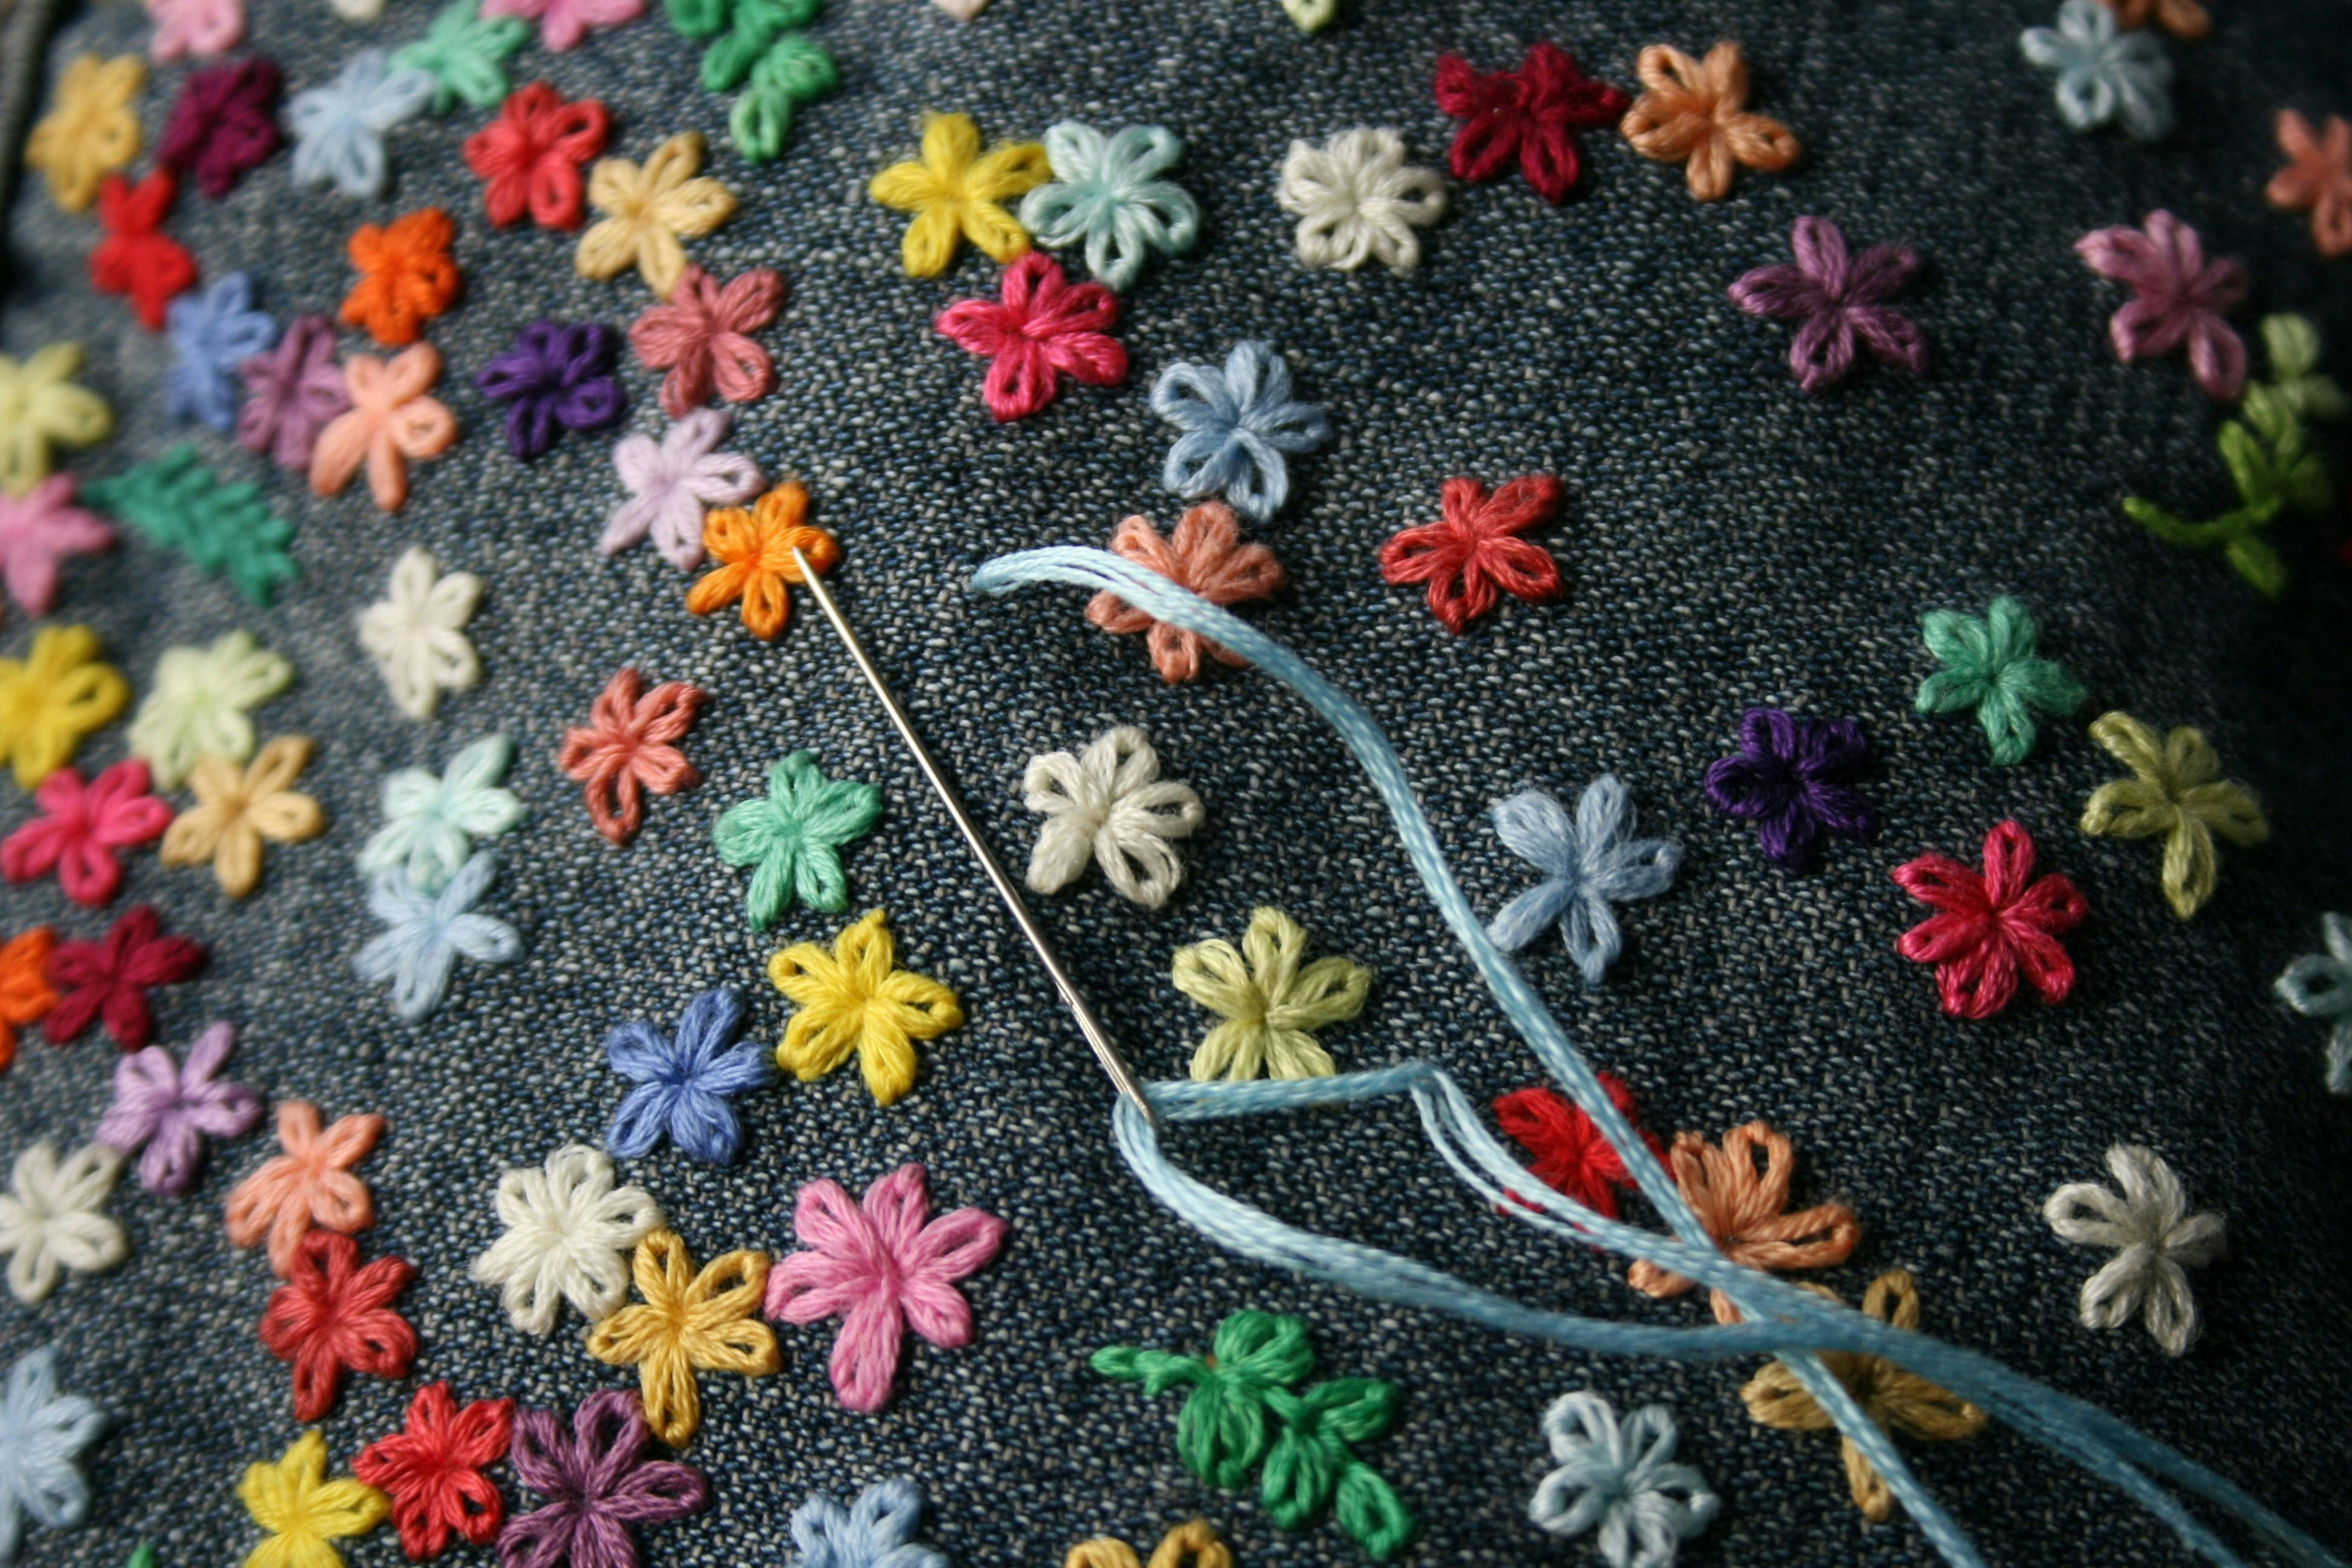 Colourful embroidered flowers